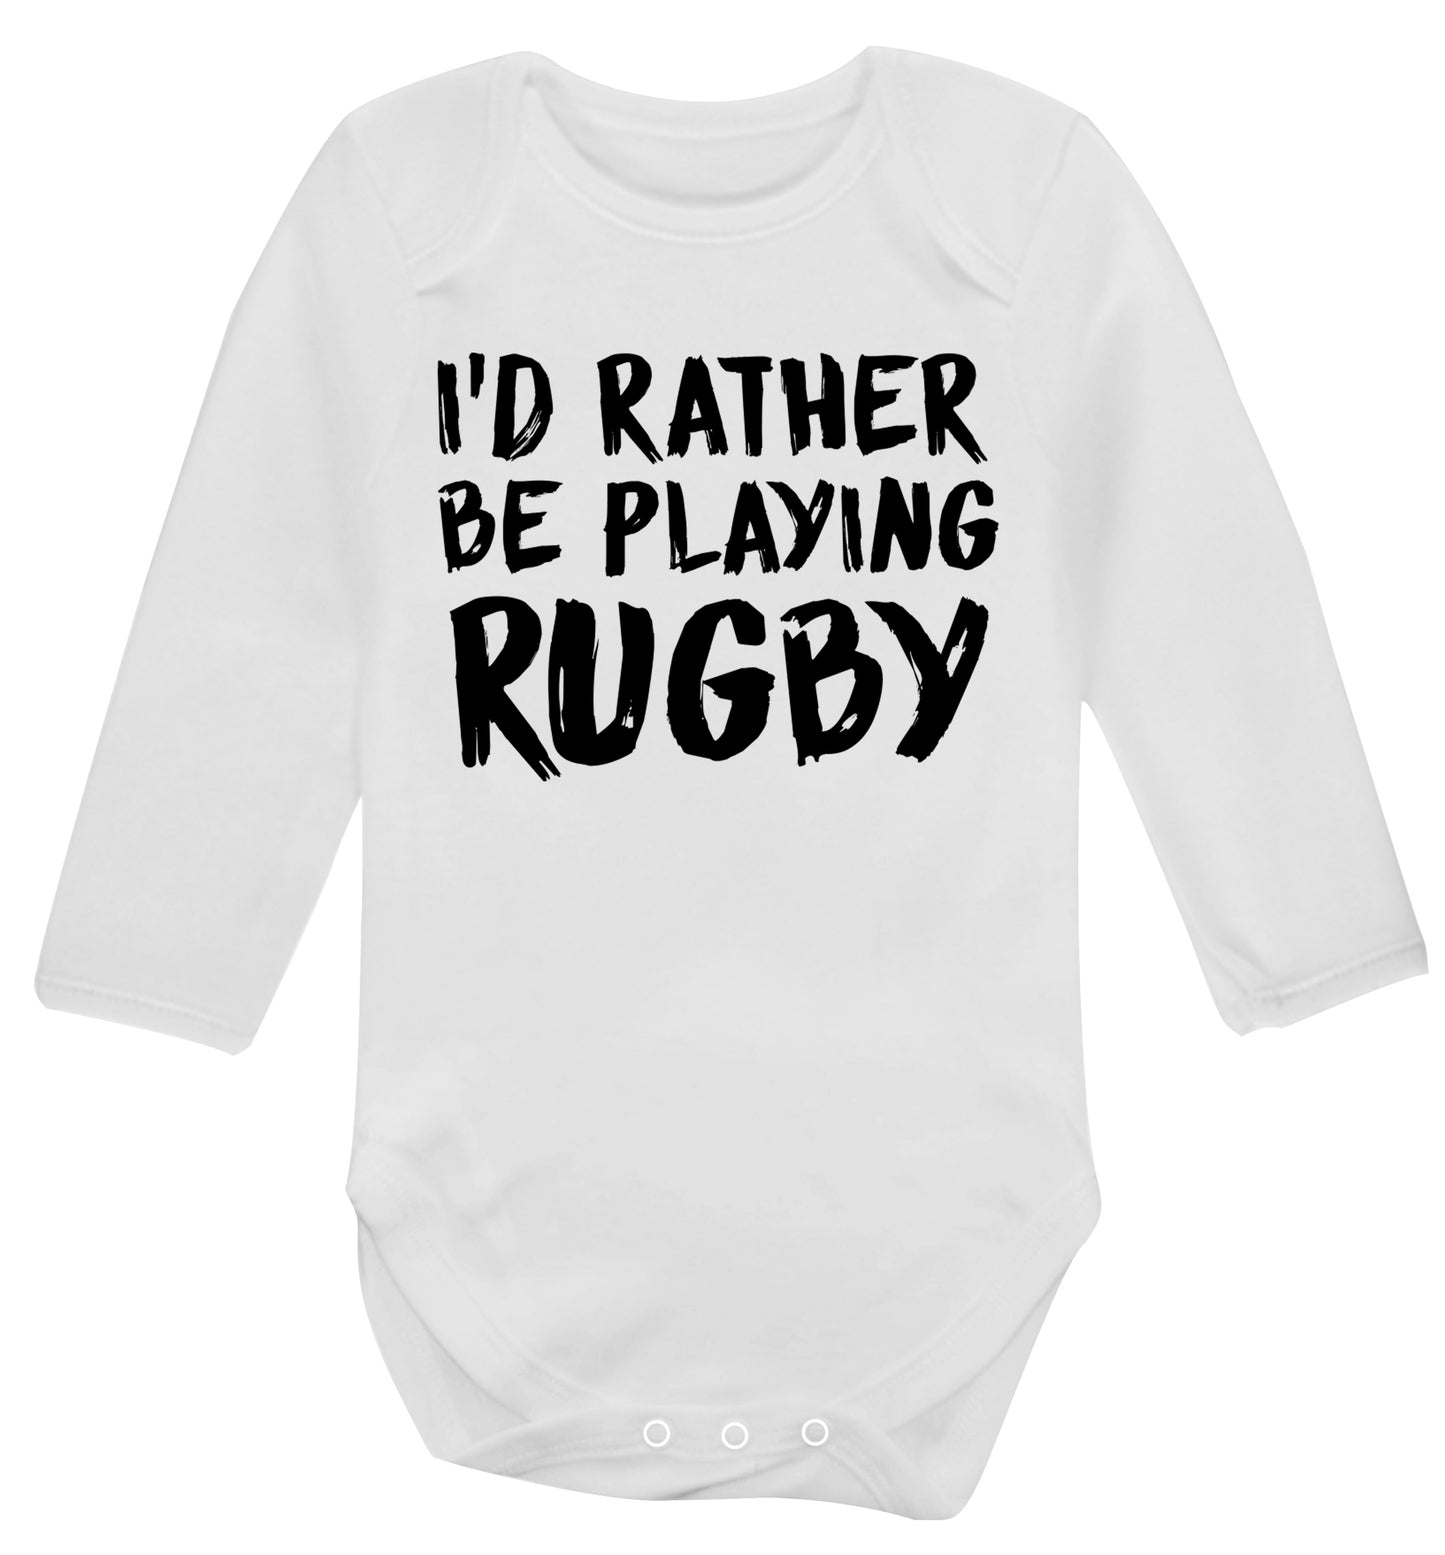 I'd rather be playing rugby Baby Vest long sleeved white 6-12 months